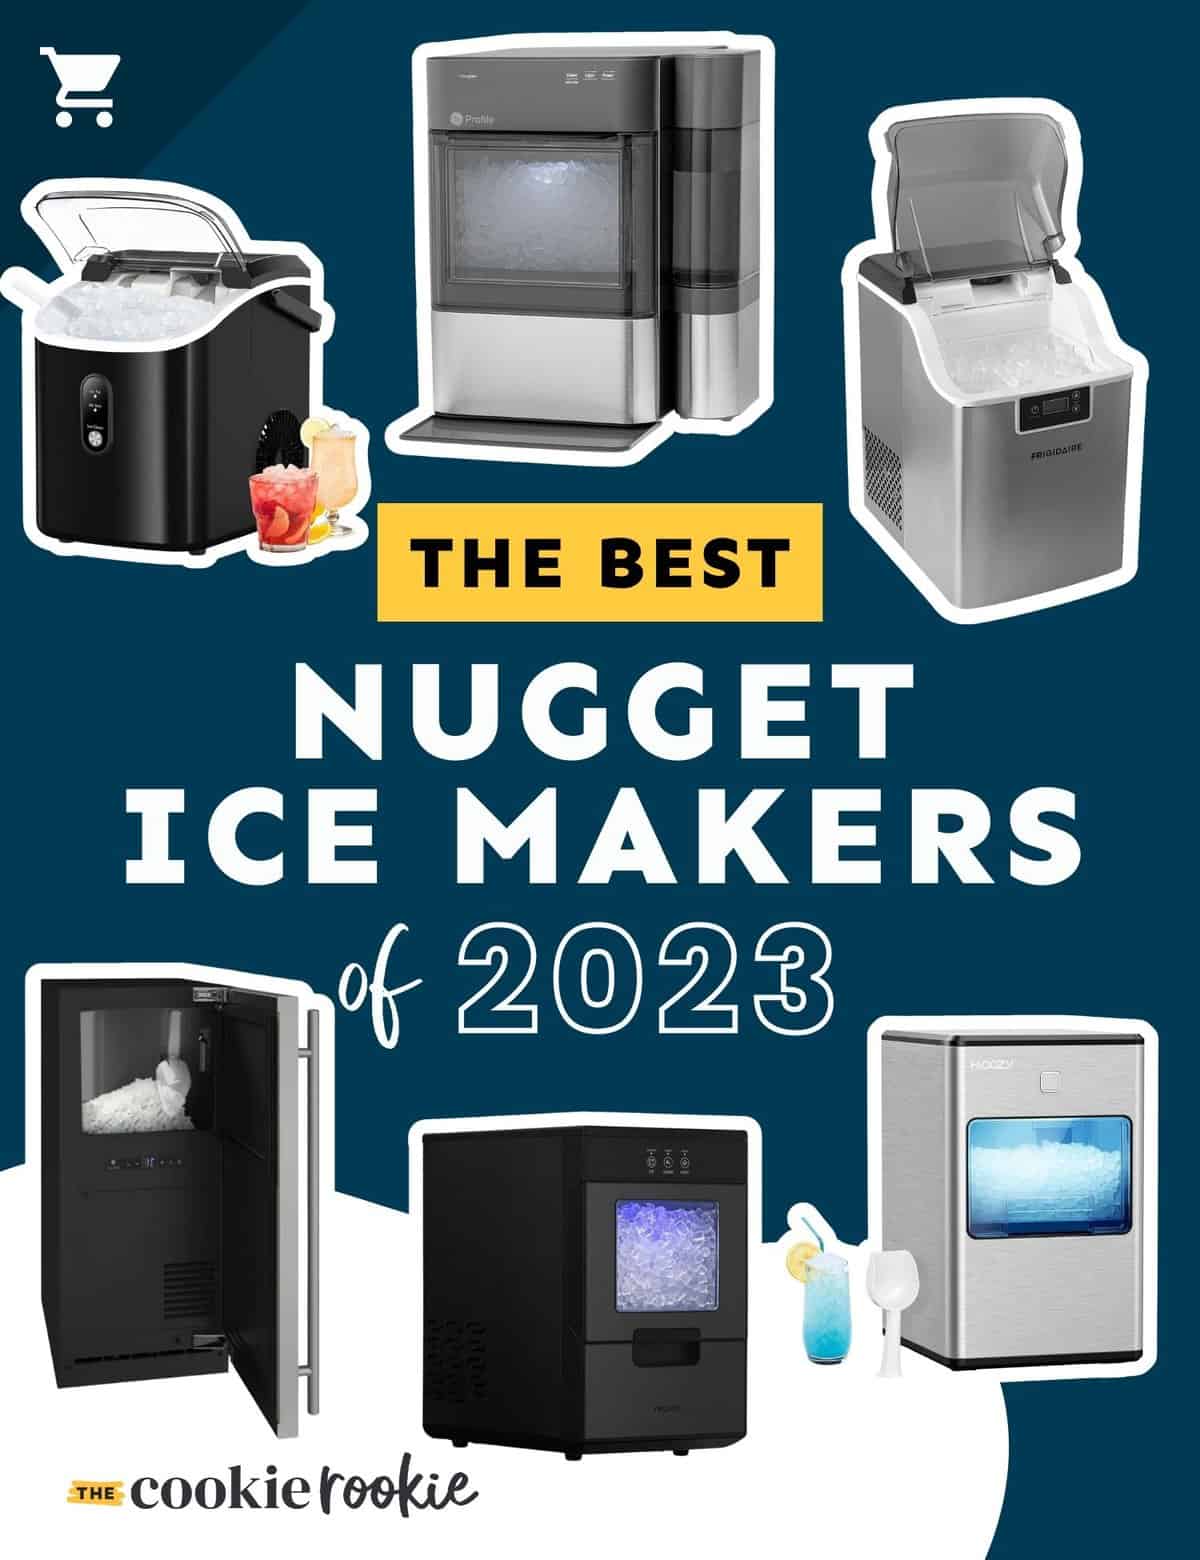 The best nugget ice makers of 2019.